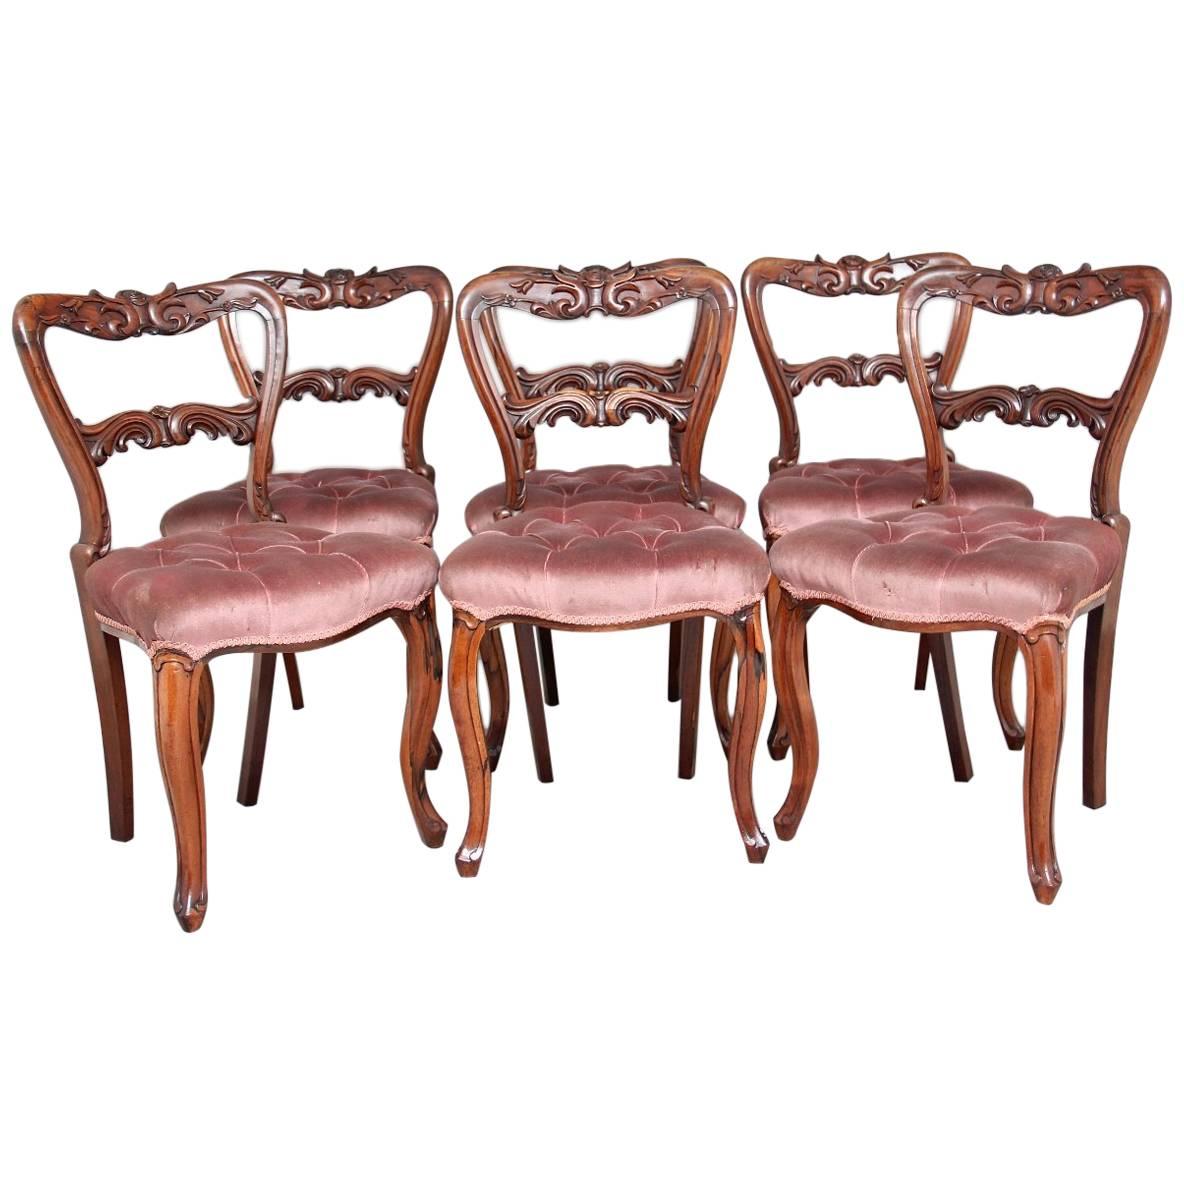 Set of Six 19th Century Rosewood Dining Chairs